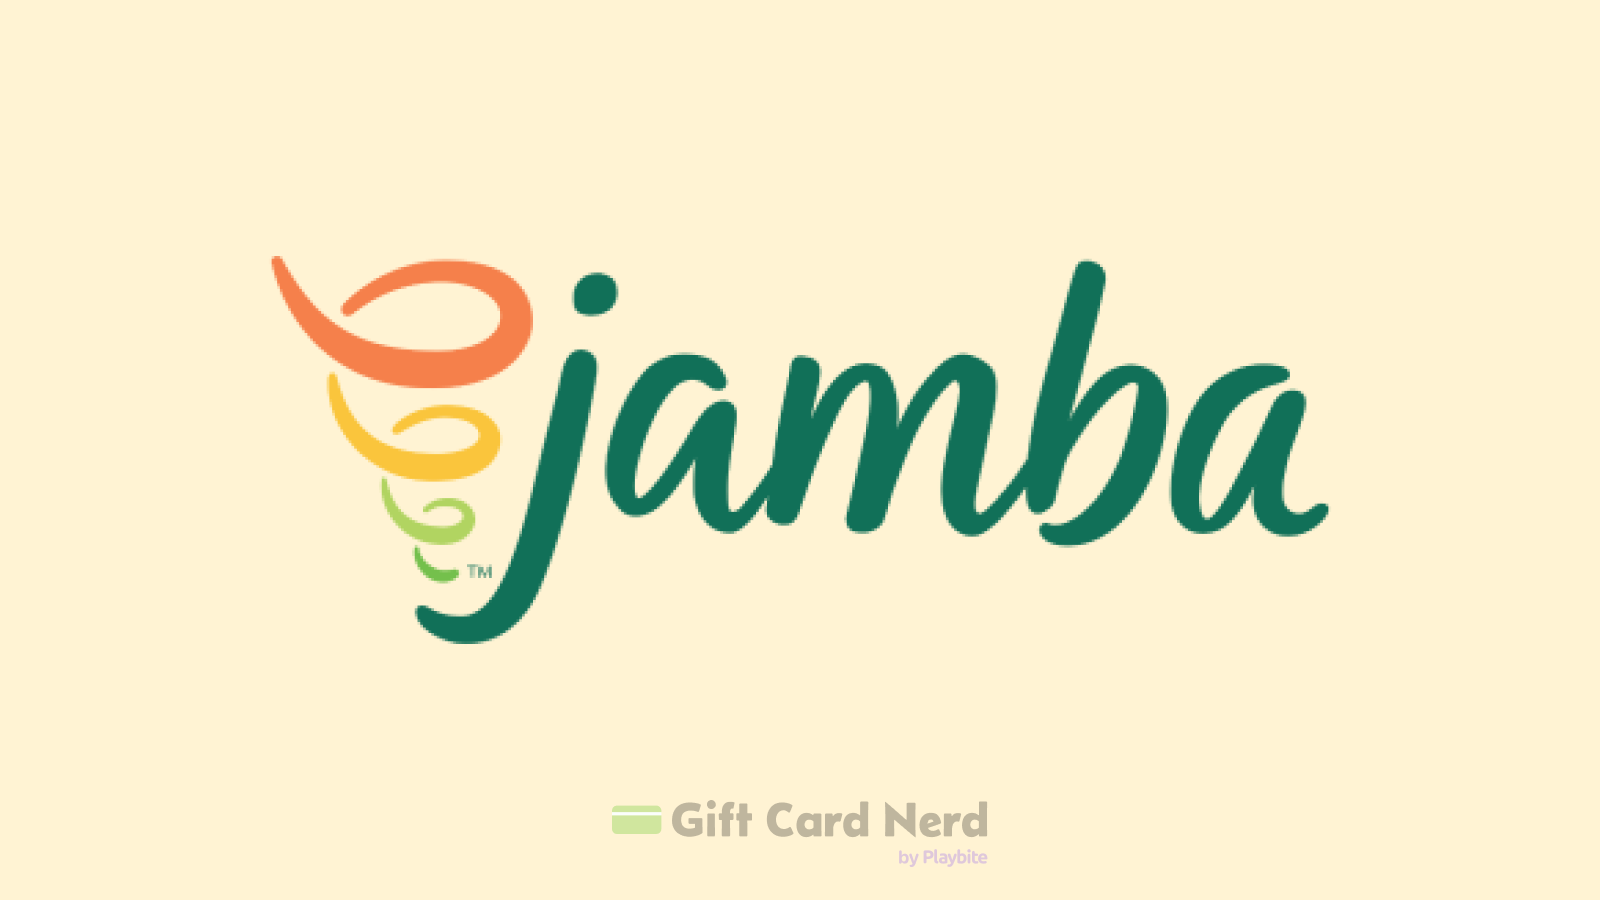 Can I Use a Jamba Juice Gift Card on Steam?